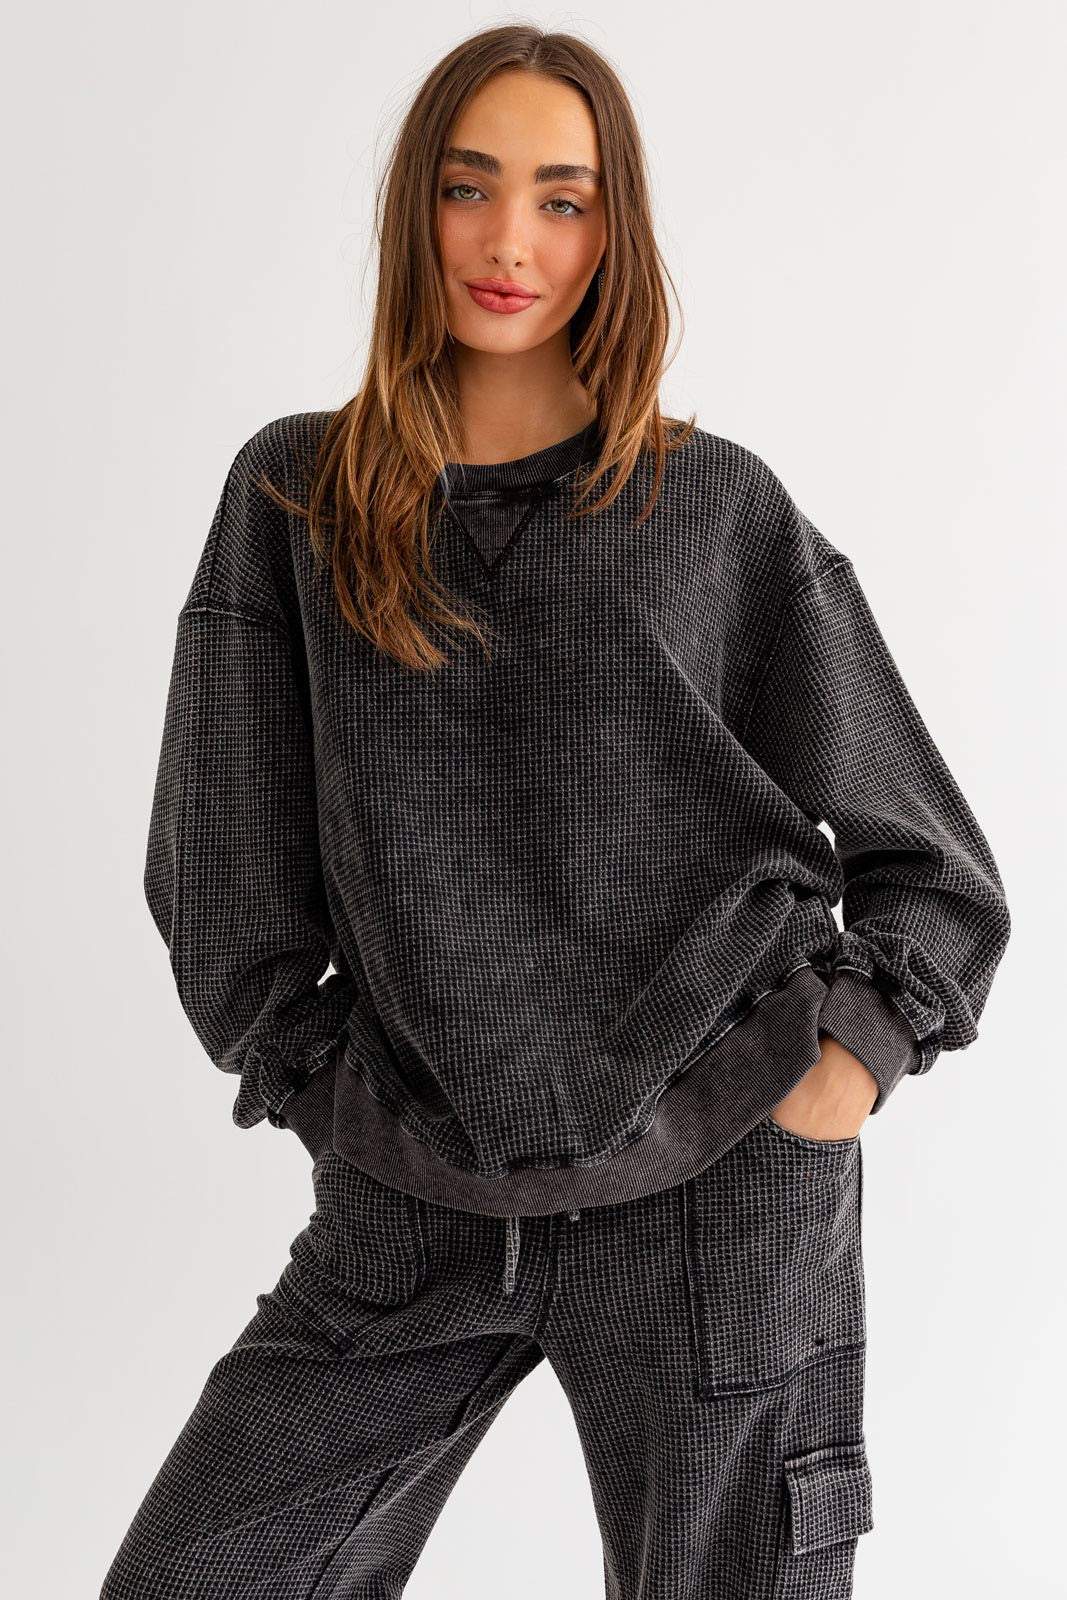 Oversized Thermal Top